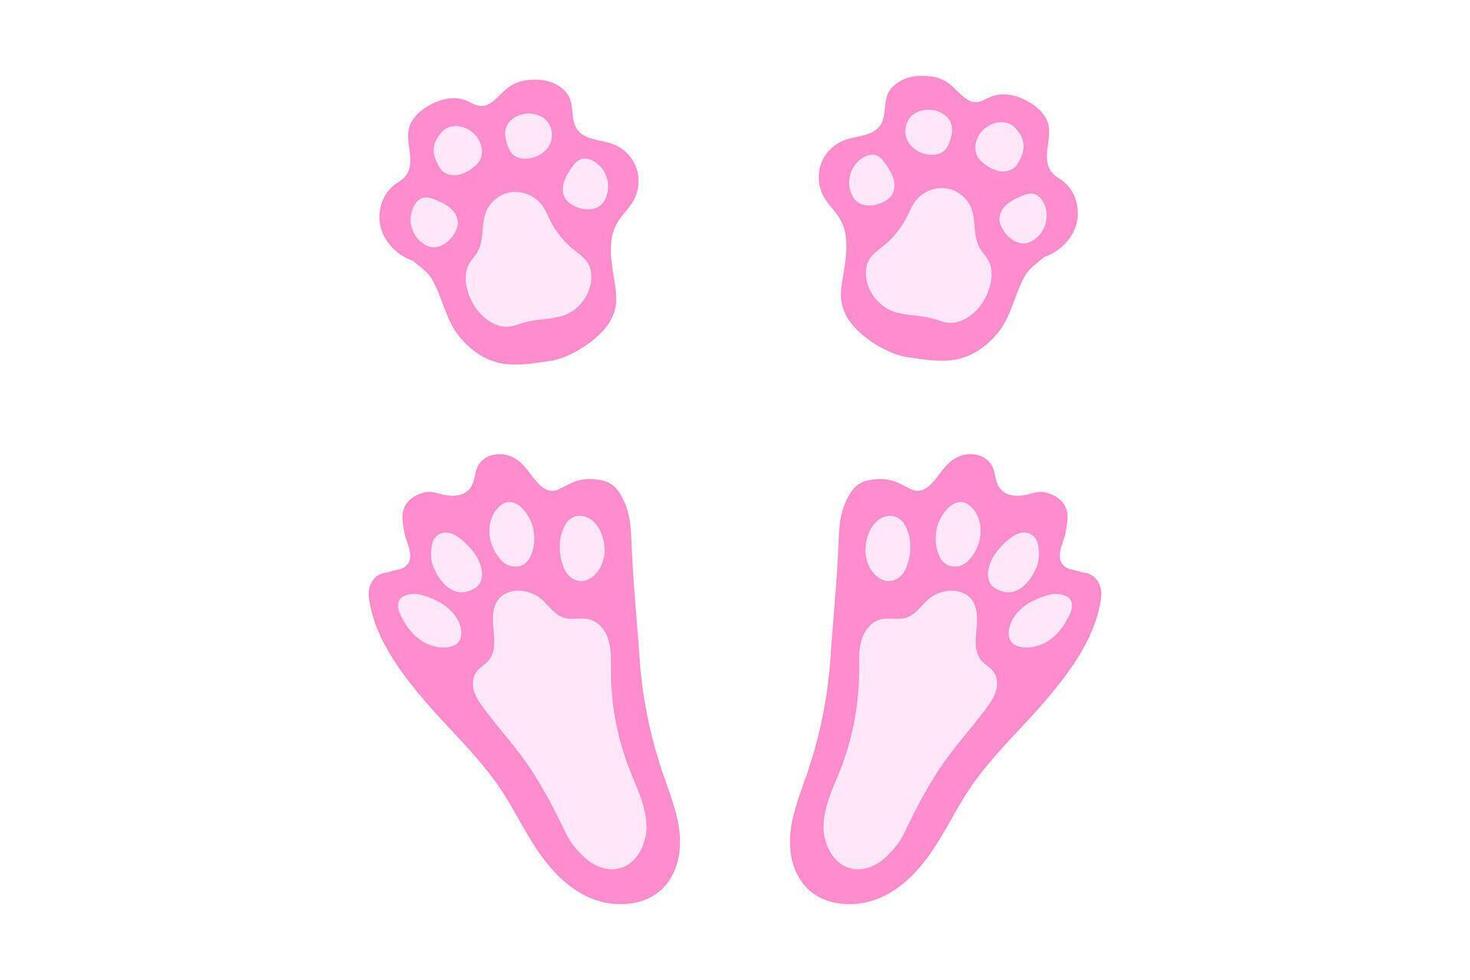 Funny pink rabbit or hare paw footprints. Cute paw prints of Easter Bunny. Cartoon cat paw prints in pink. Isolated on white background. Concept of animal tracks. Icon, symbol, print, postcard vector